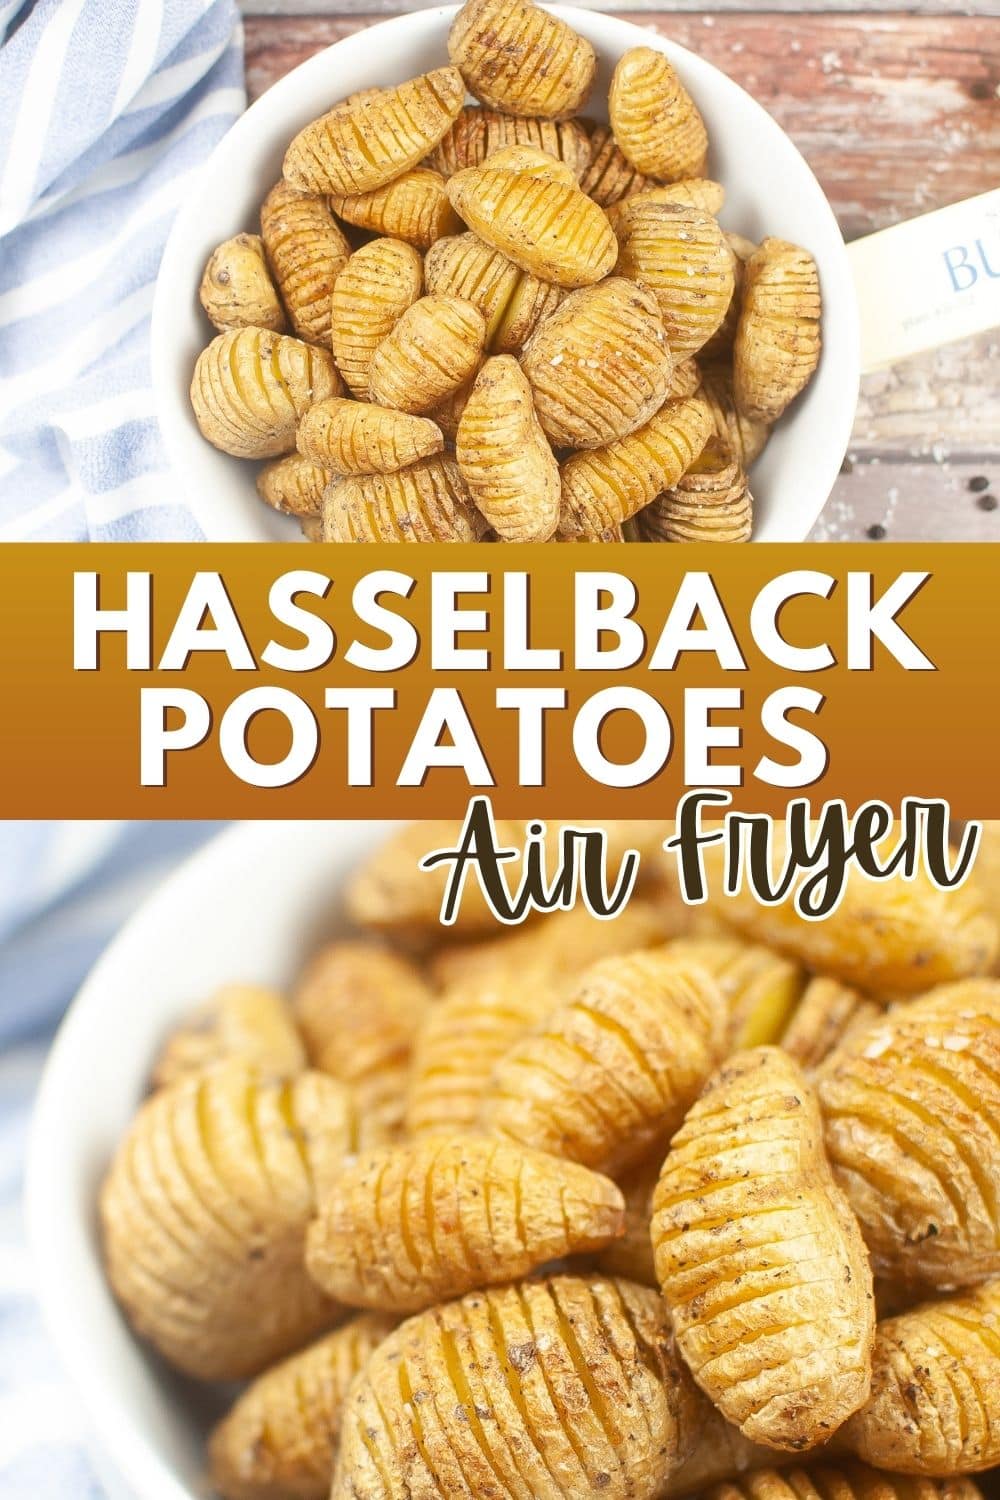 Hasselback potatoes in a bowl with the text hasselback potatoes and air fryer.